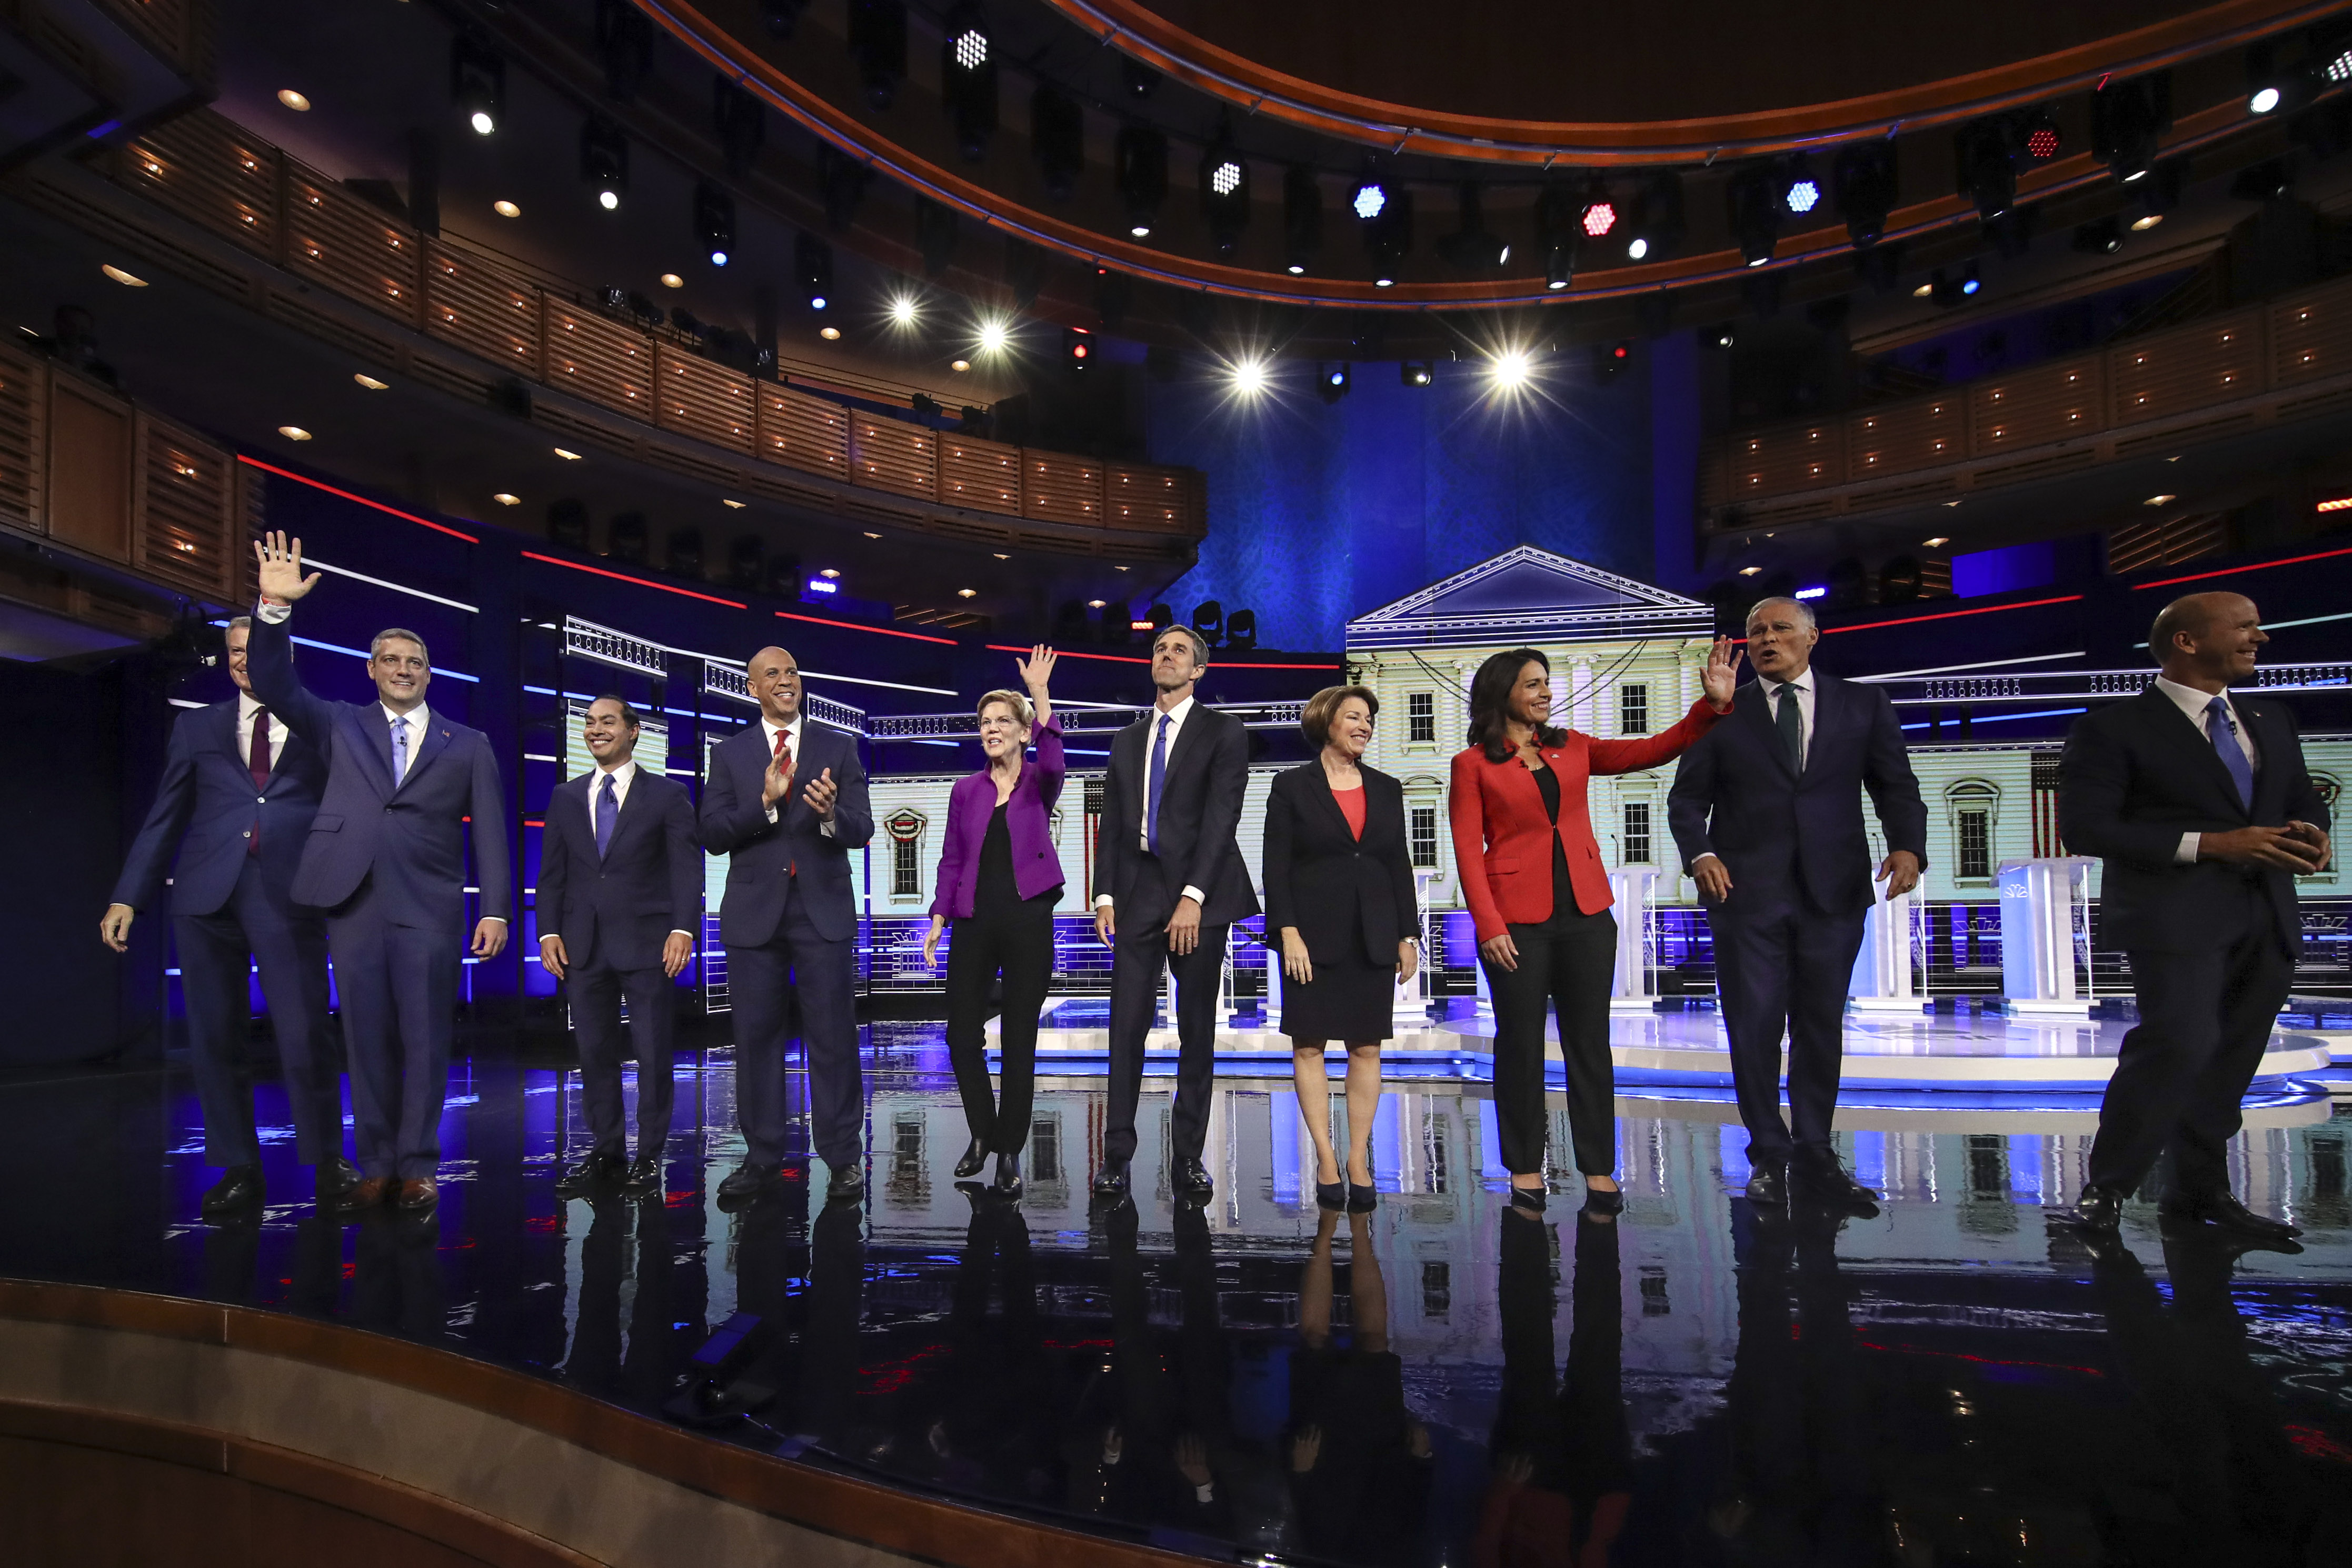 (L-R) Democratic presidential candidates New York City Mayor Bill de Blasio (L-R), Rep. Tim Ryan, former Housing Secretary Julian Castro, Sen. Cory Booker, Sen. Elizabeth Warren, former Texas Rep. Beto O'Rourke, Sen. Amy Klobuchar, Rep. Tulsi Gabbard, Washington Gov. Jay Inslee, and former Maryland Rep. John Delaney take the stage for the first Democratic presidential primary debate for the 2020 election at the Adrienne Arsht Center for the Performing Arts, June 26, 2019 in Miami, Florida. (Photo by Drew Angerer/Getty Images)